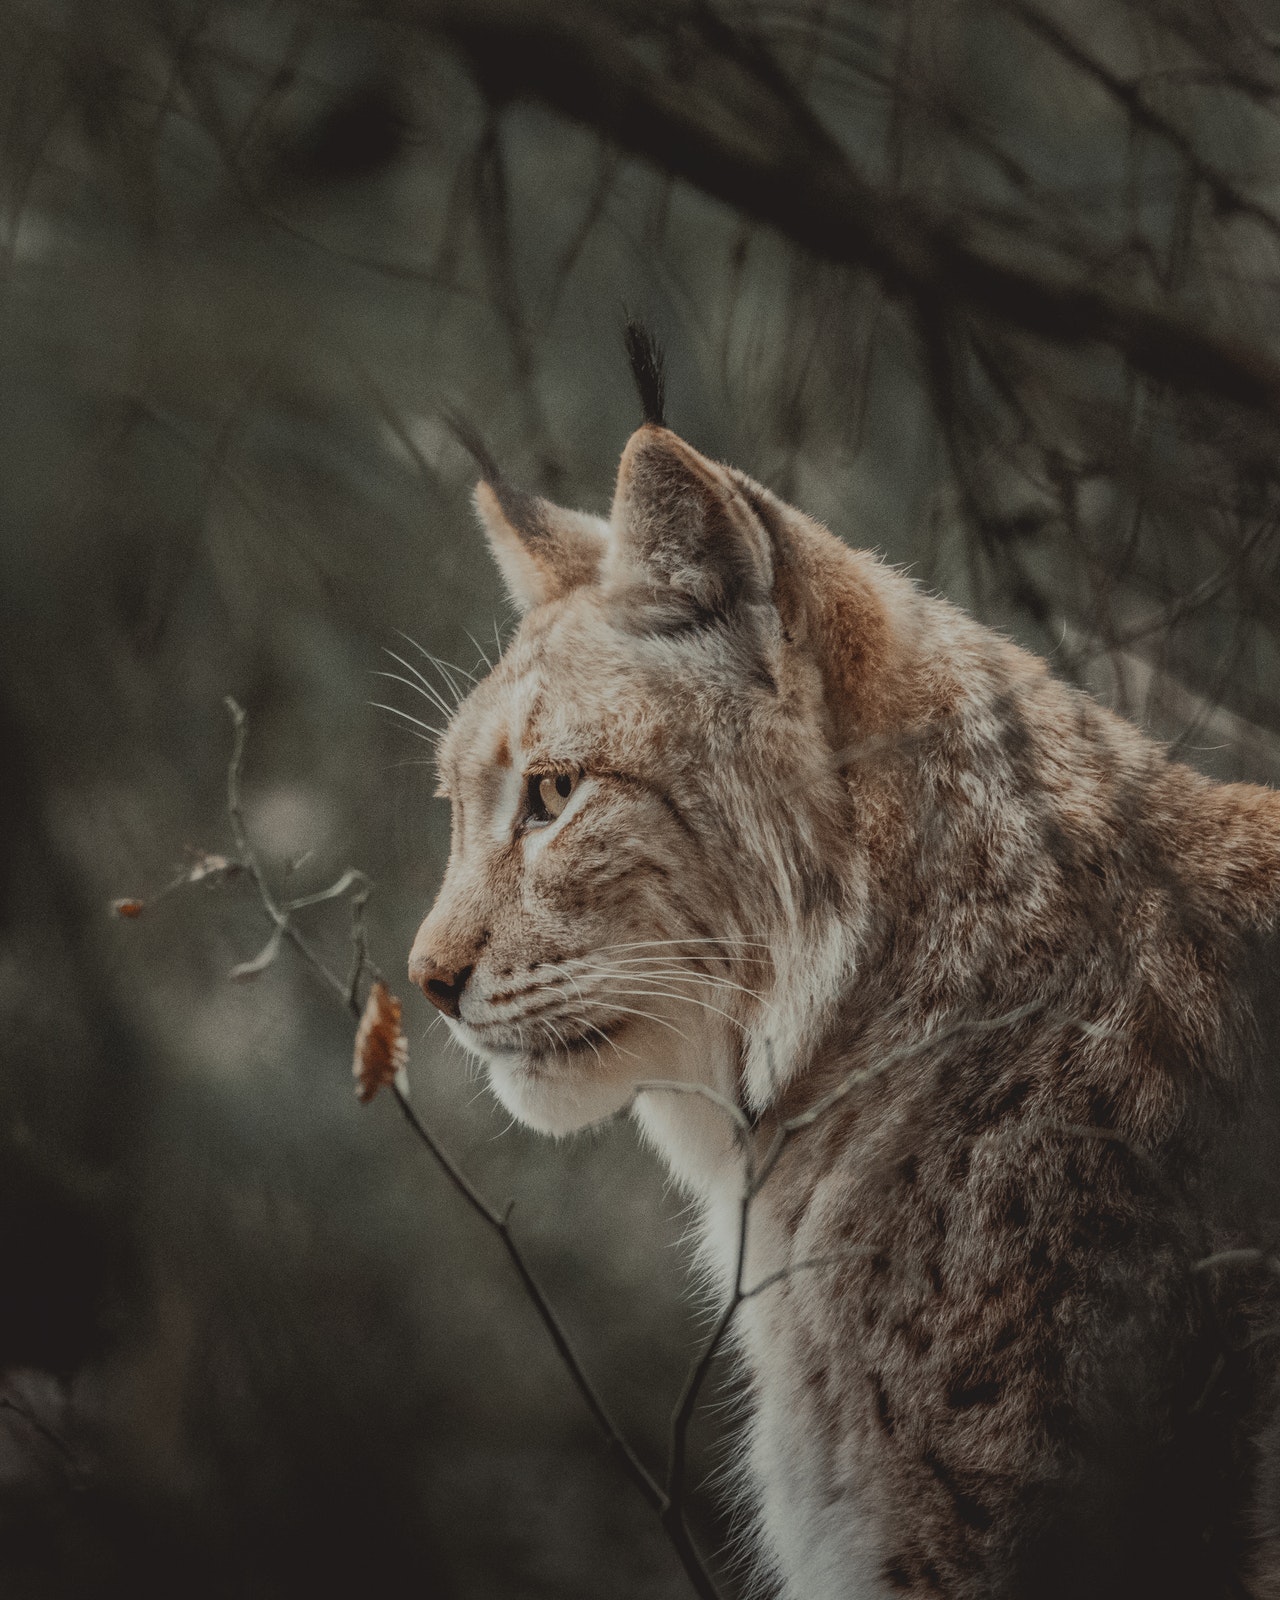 55 Fun Facts About Bobcats For Kids - The Fact Site